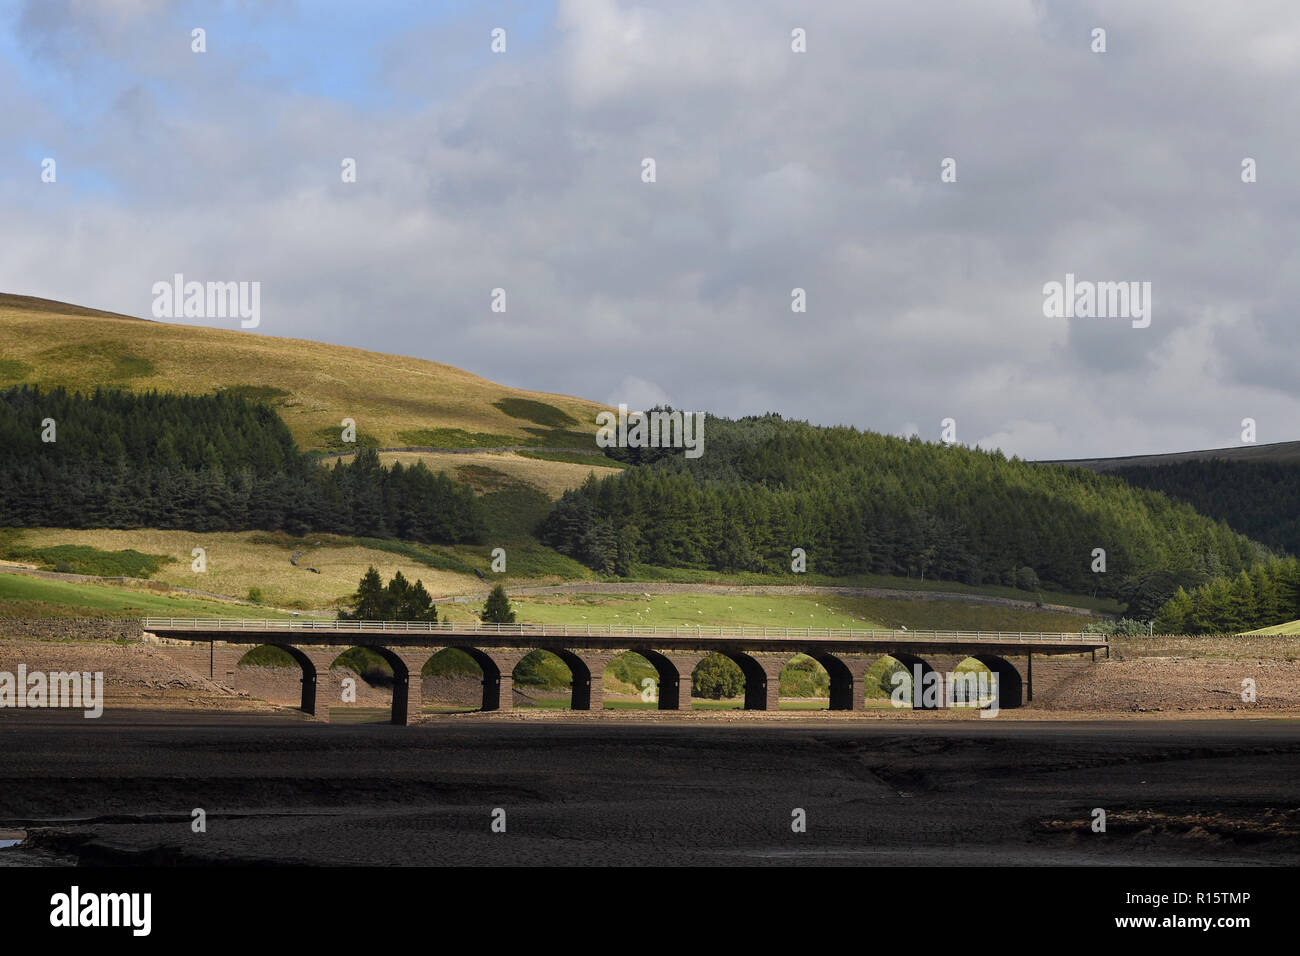 General view of extremely low water levels in Woodhead Reservoir, part of the Longdendale Reservoir system in the High Peak District Stock Photo